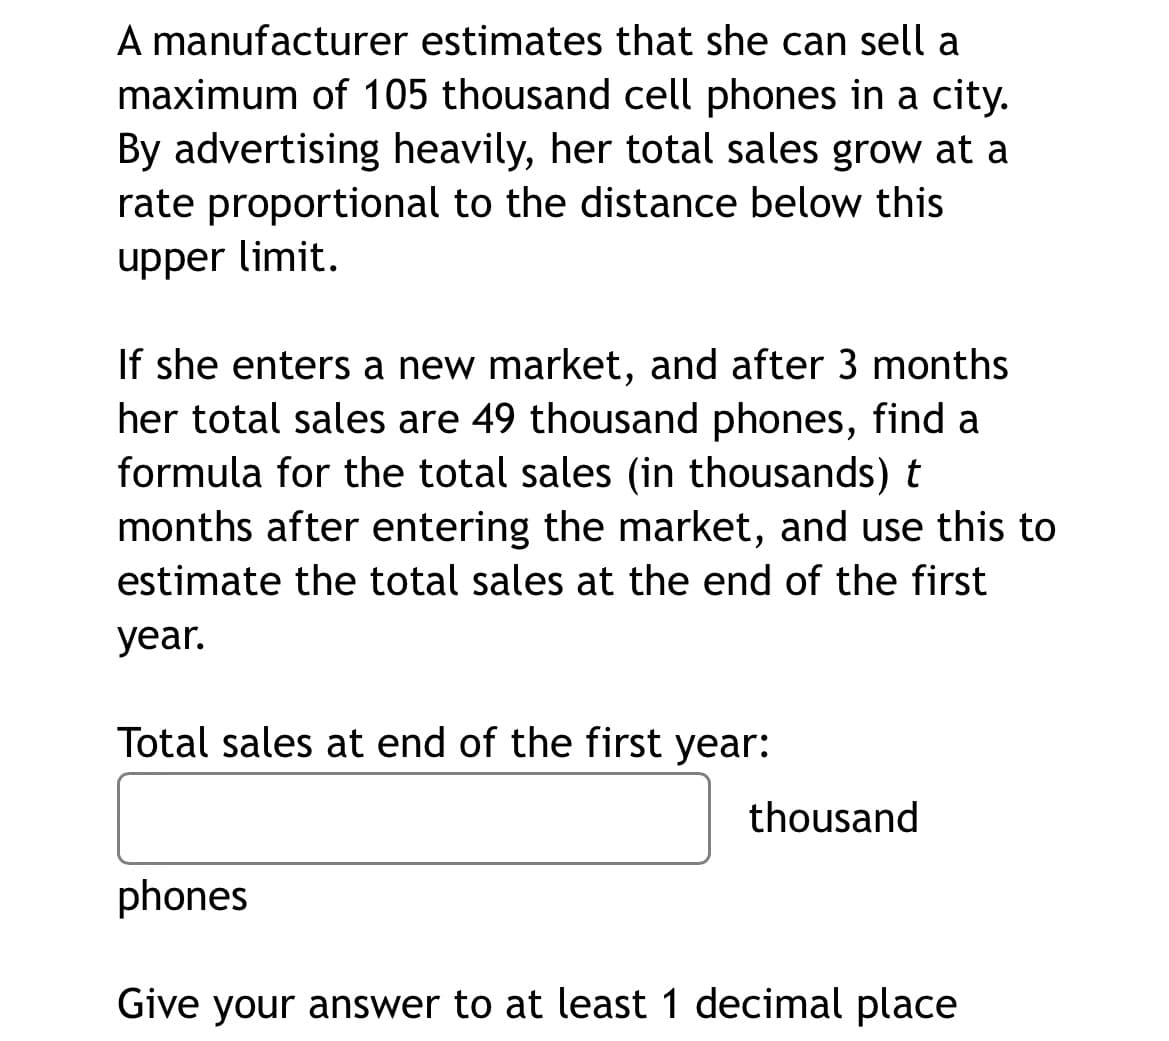 A manufacturer estimates that she can sell a
maximum of 105 thousand cell phones in a city.
By advertising heavily, her total sales grow at a
rate proportional to the distance below this
upper limit.
If she enters a new market, and after 3 months
her total sales are 49 thousand phones, find a
formula for the total sales (in thousands) t
months after entering the market, and use this to
estimate the total sales at the end of the first
year.
Total sales at end of the first year:
thousand
phones
Give your answer to at least 1 decimal place
